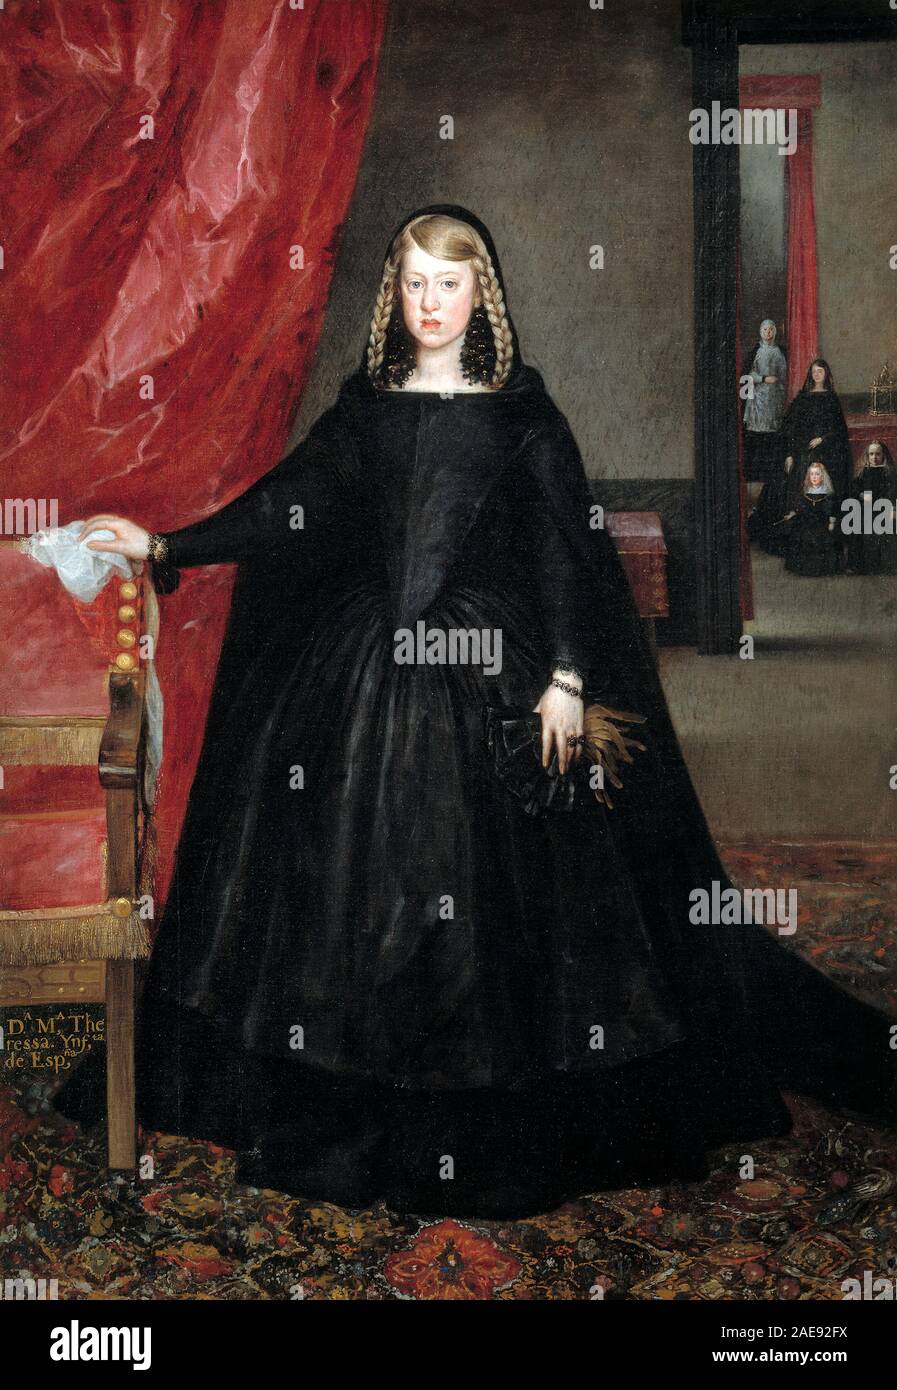 The Infanta Margaret Theresa (1651–73), in mourning dress for her father in 1666, by Juan del Mazo. Margaret Theresa of Spain (1651 – 1673) was, by marriage to Leopold I, Holy Roman Empress, German Queen, Archduchess of Austria and Queen of Hungary and Bohemia. Stock Photo